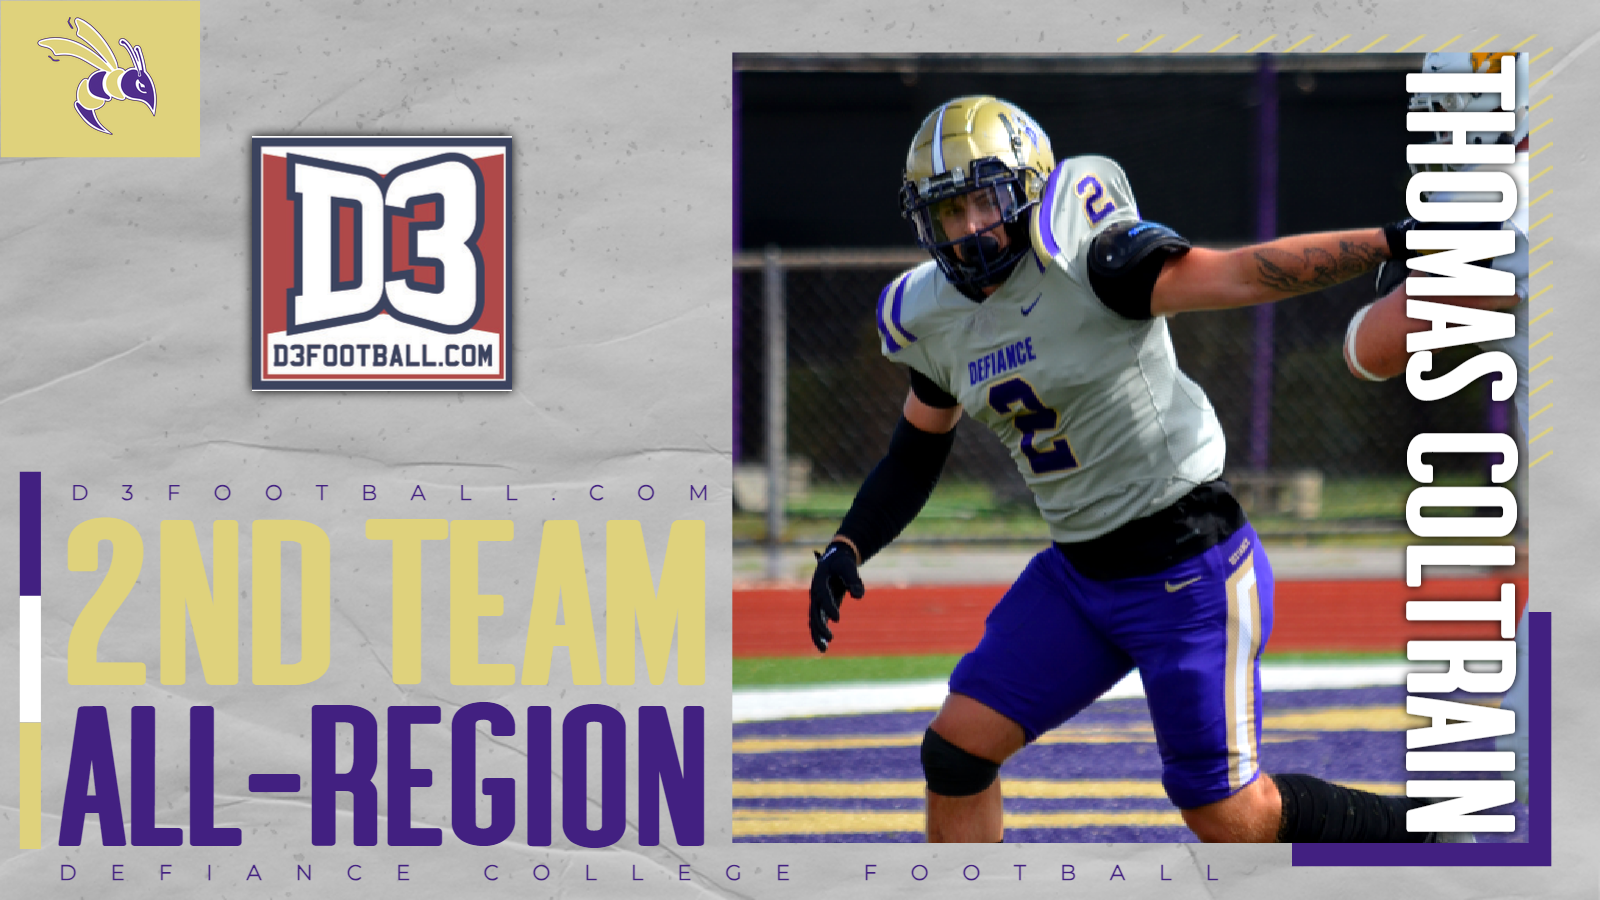 Coltrain named Second Team All-Region